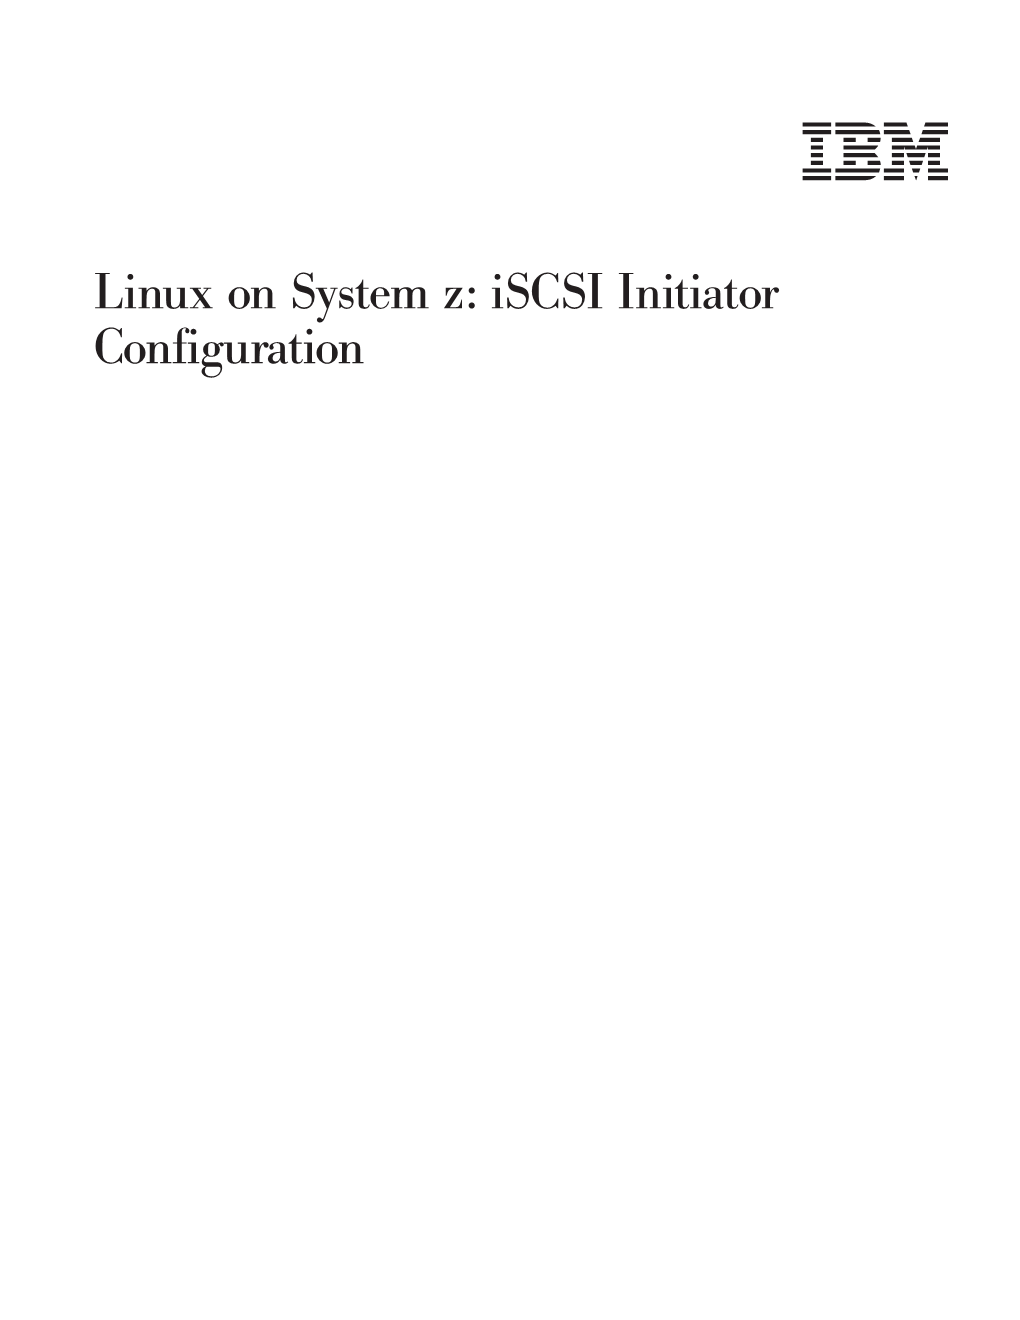 Linux on System Z: Iscsi Initiator Configuration